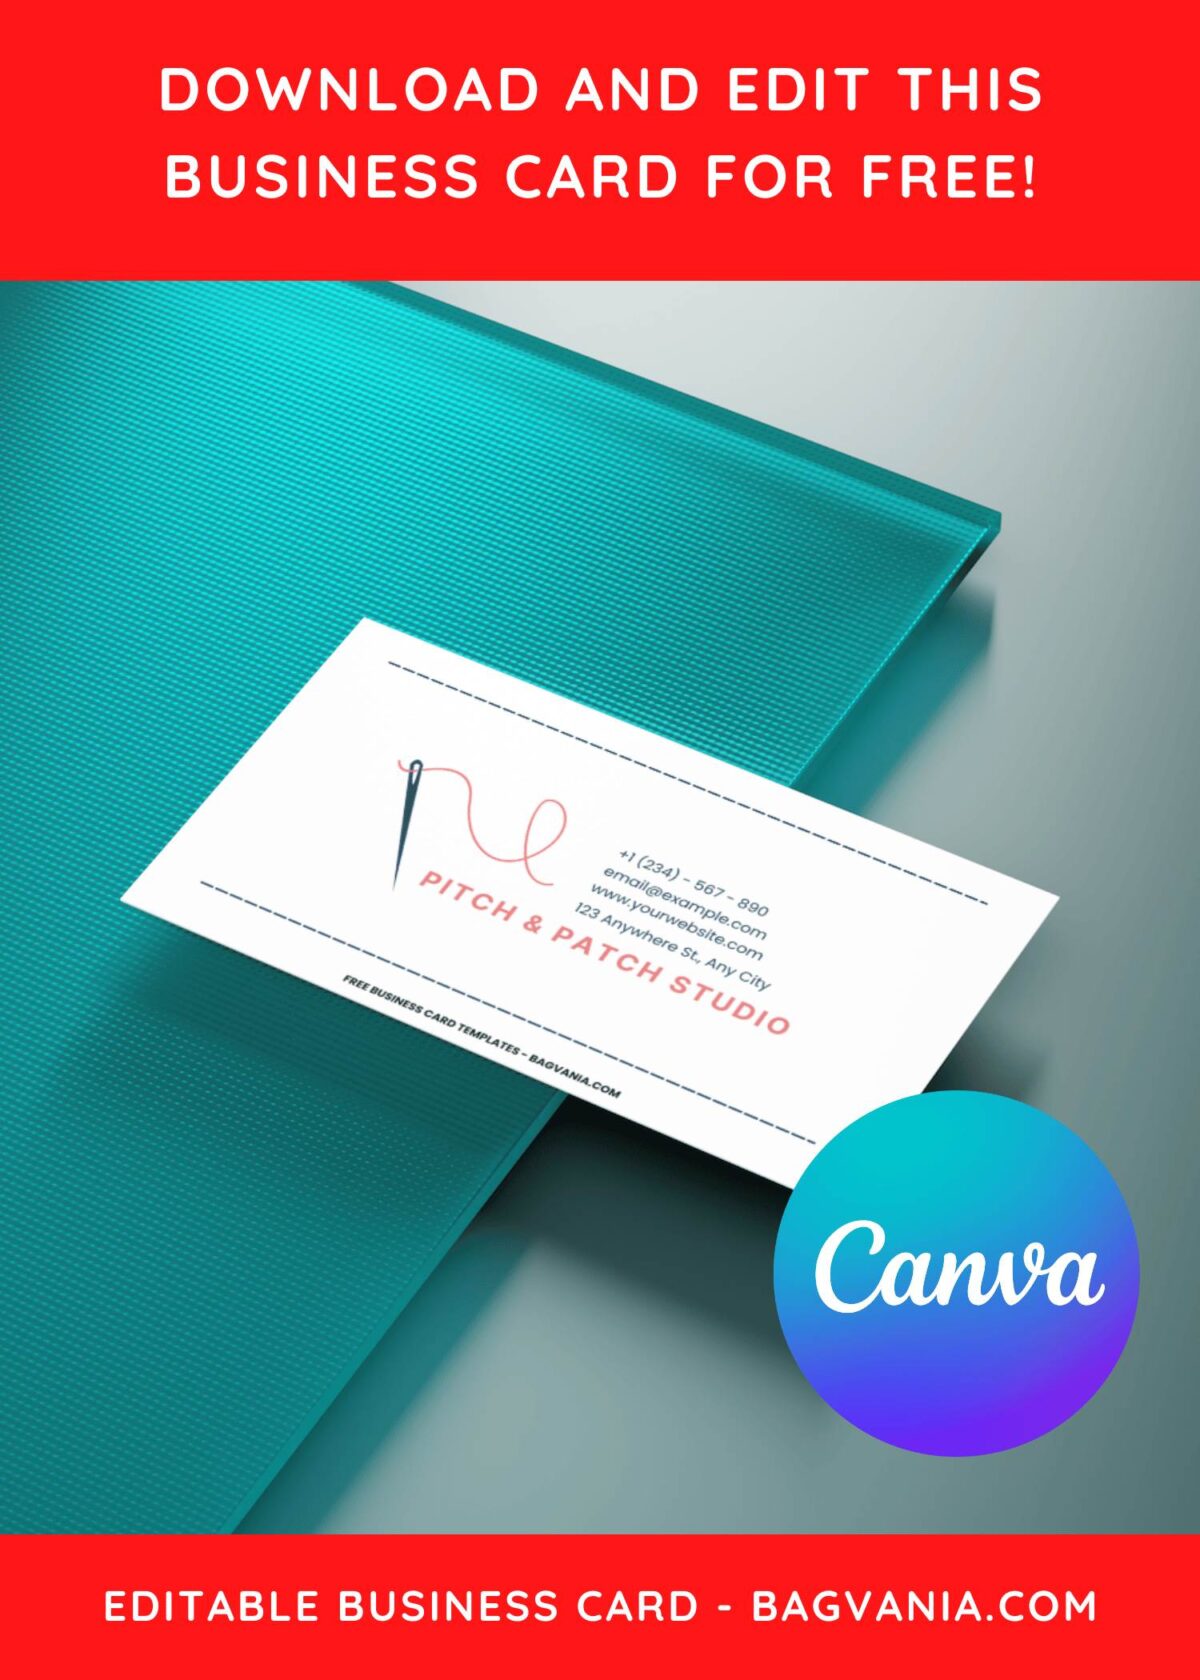 10+ Blue And White Accent Tailor Canva Business Card Templates A